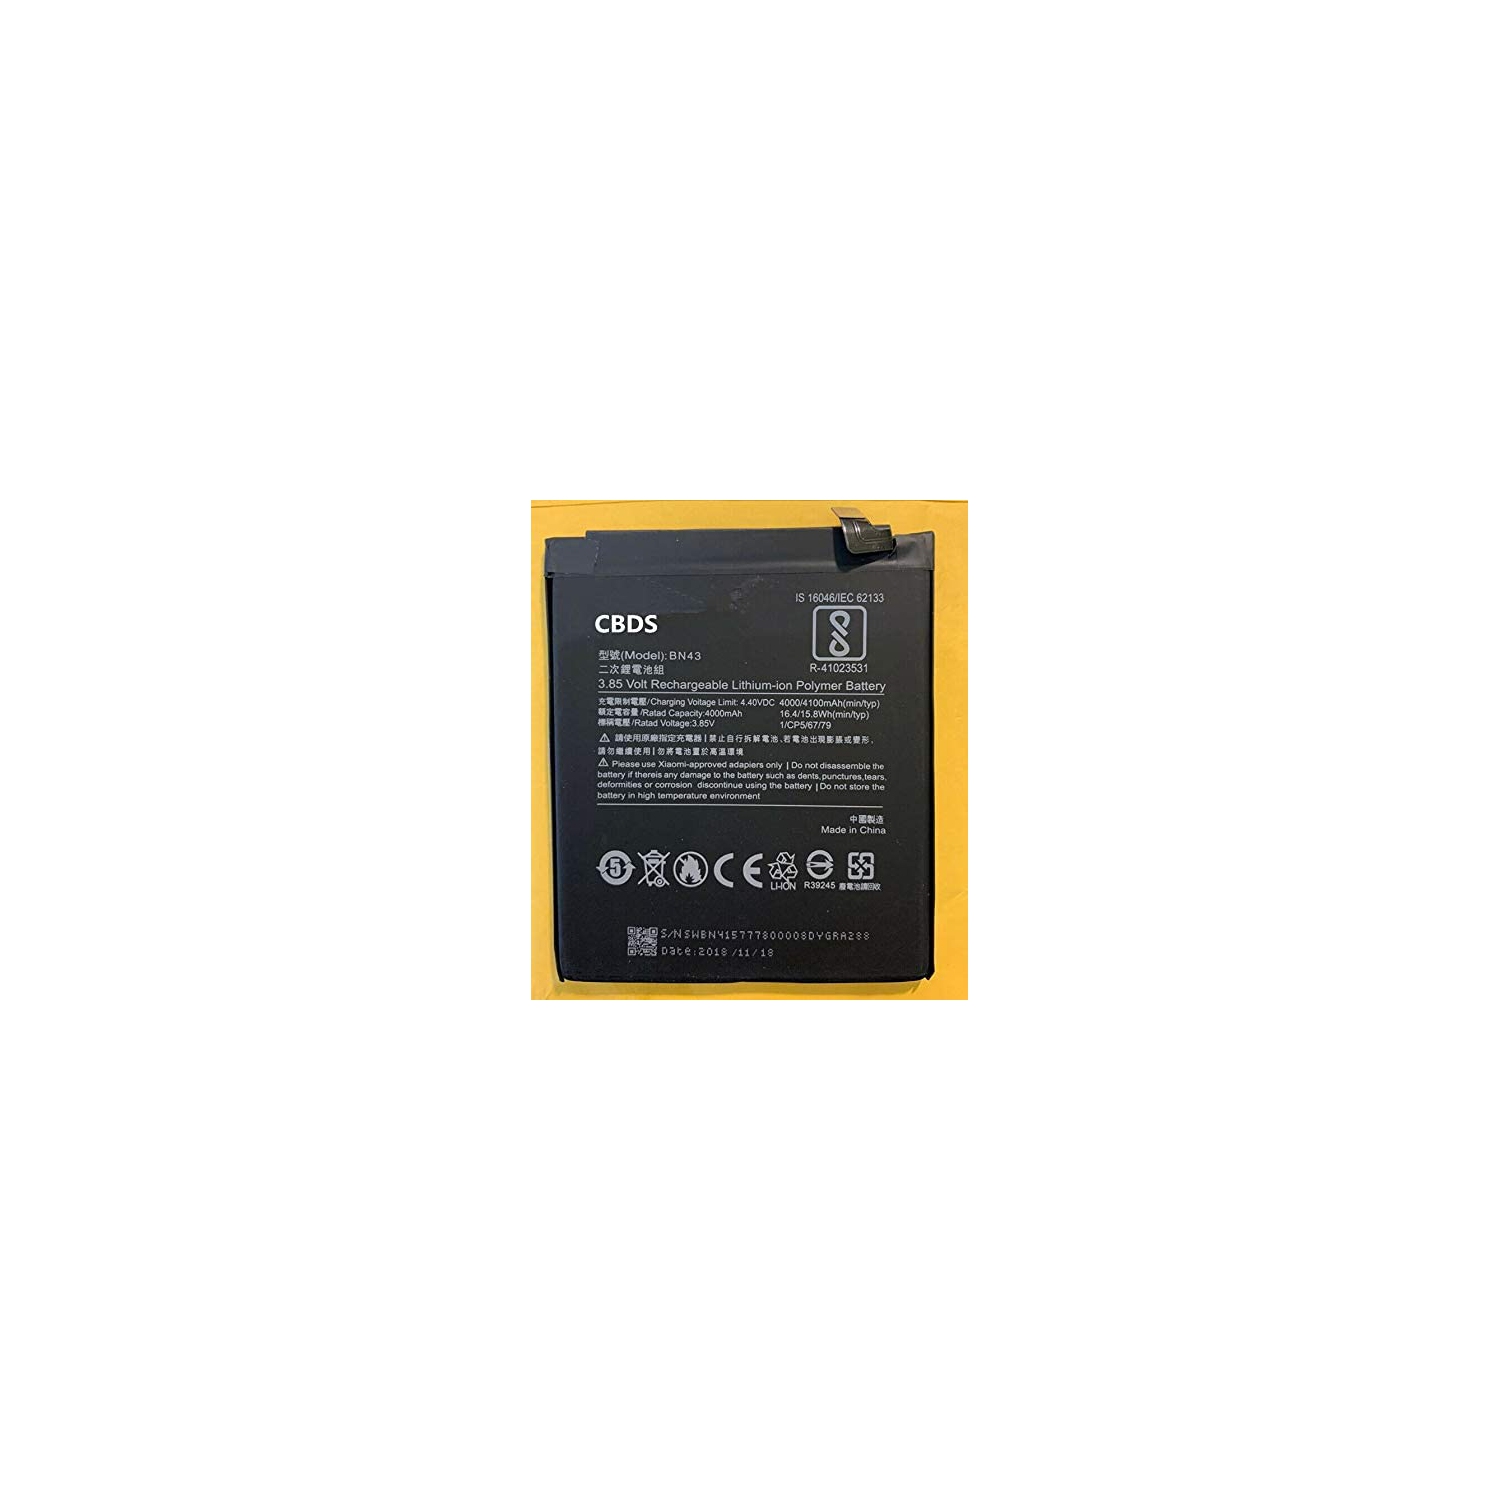 (CBDS) 4000mAh, 16.4 Wh Replacement Battery - Compatible with XIAOMI REDMI Note 4X BN43 in Non-Retail Packaging.